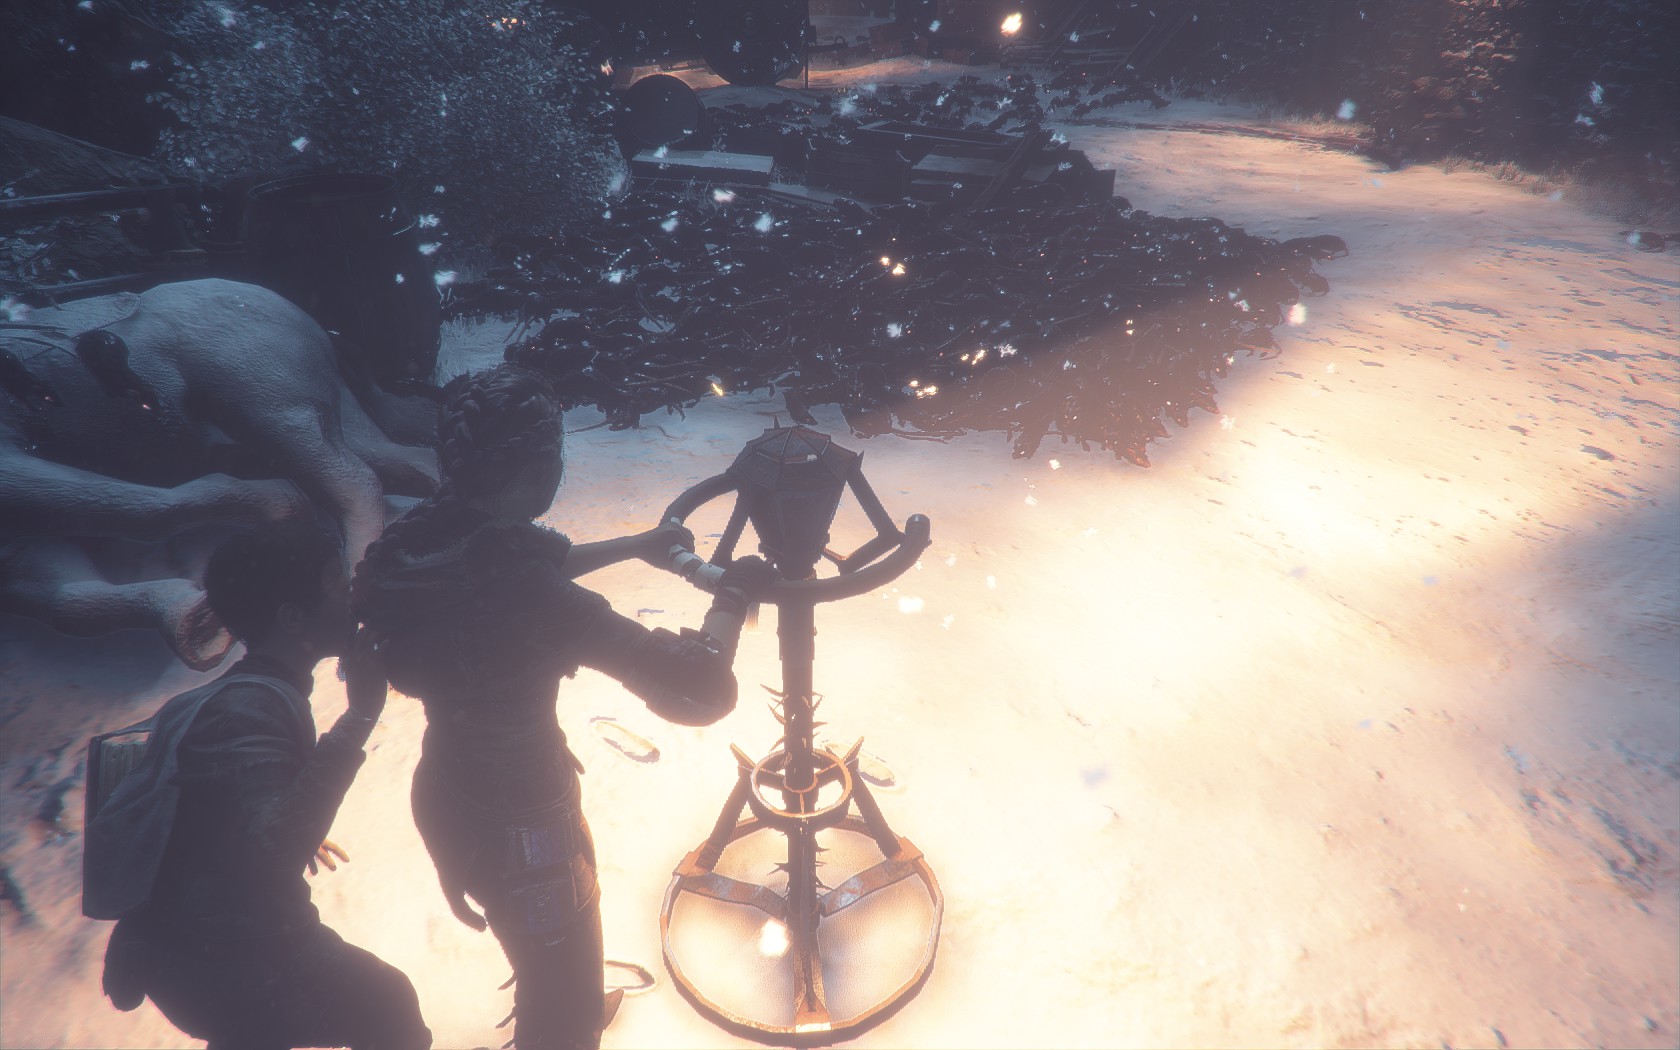 A Plague Tale: Innocence (PS4) Review: Gorgeous and creepy story will draw  you in • AIPT